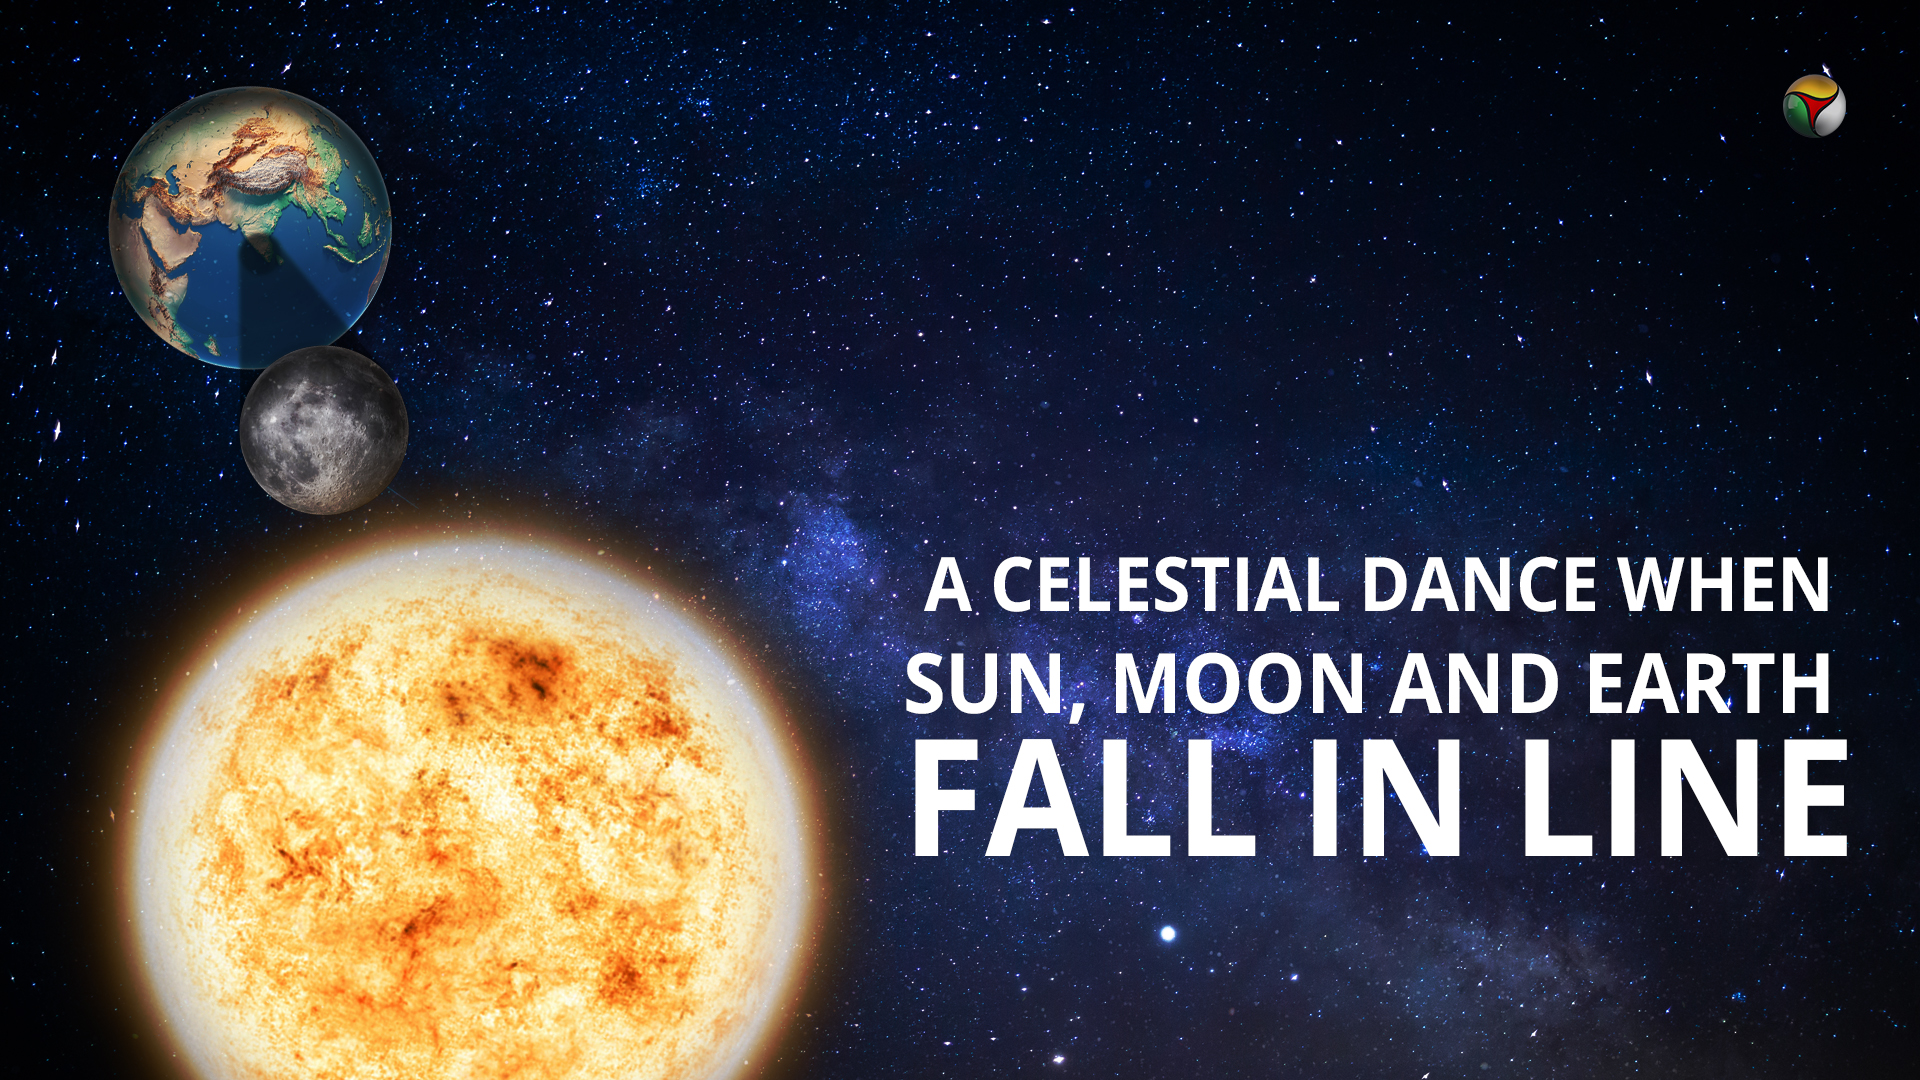 A celestial dance when sun, moon and earth fall in line